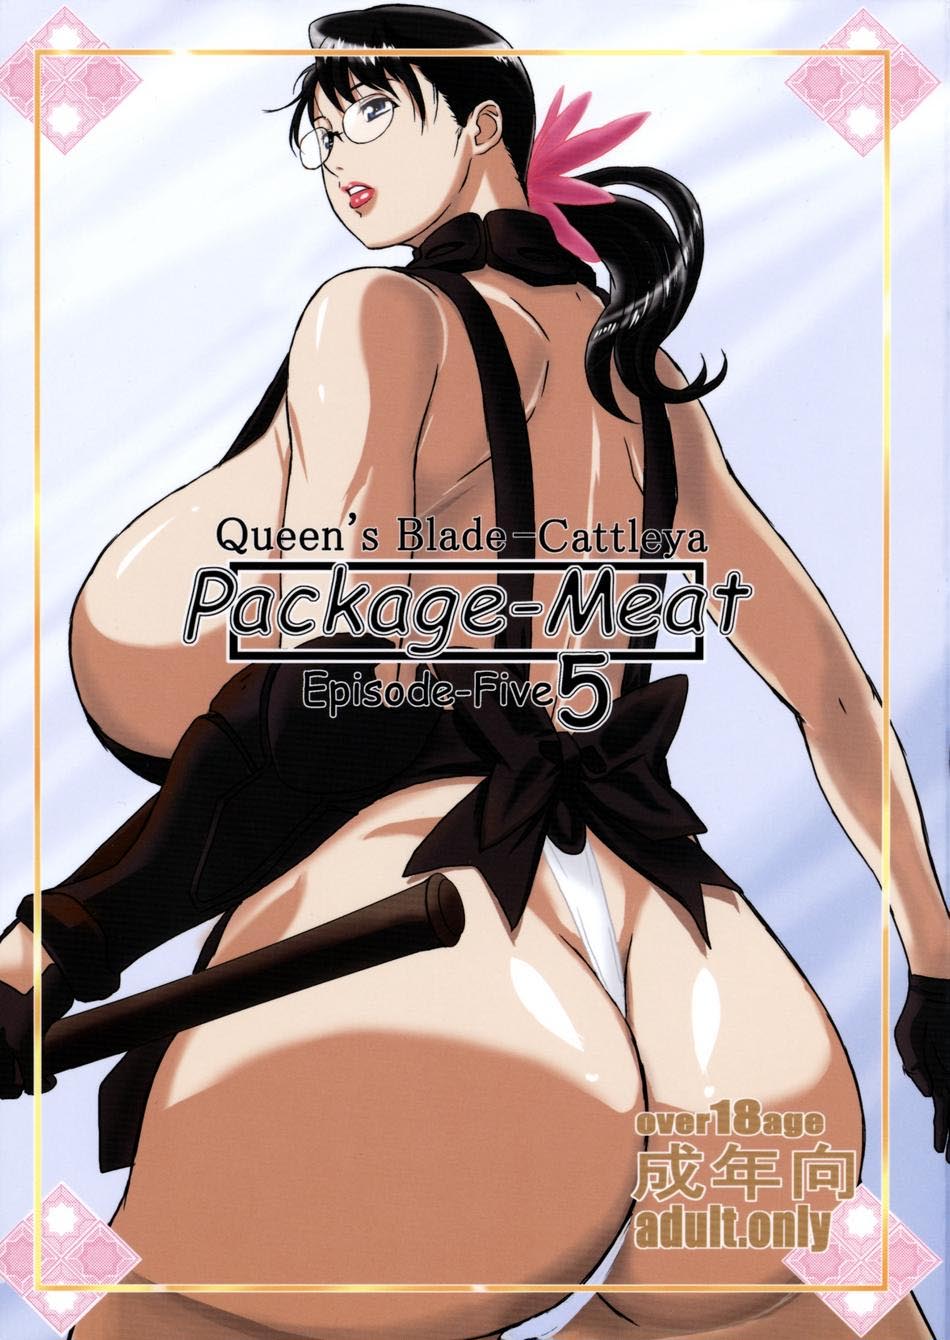 (C76) [Shiawase Pullin Dou (Ninroku)] Package-Meat 5 (Queen's Blade) [Spanish] [Abstractosis] (C76) [しあわせプリン堂 (認六)] Package Meat 5 (クイーンズブレイド) [スペイン翻訳]